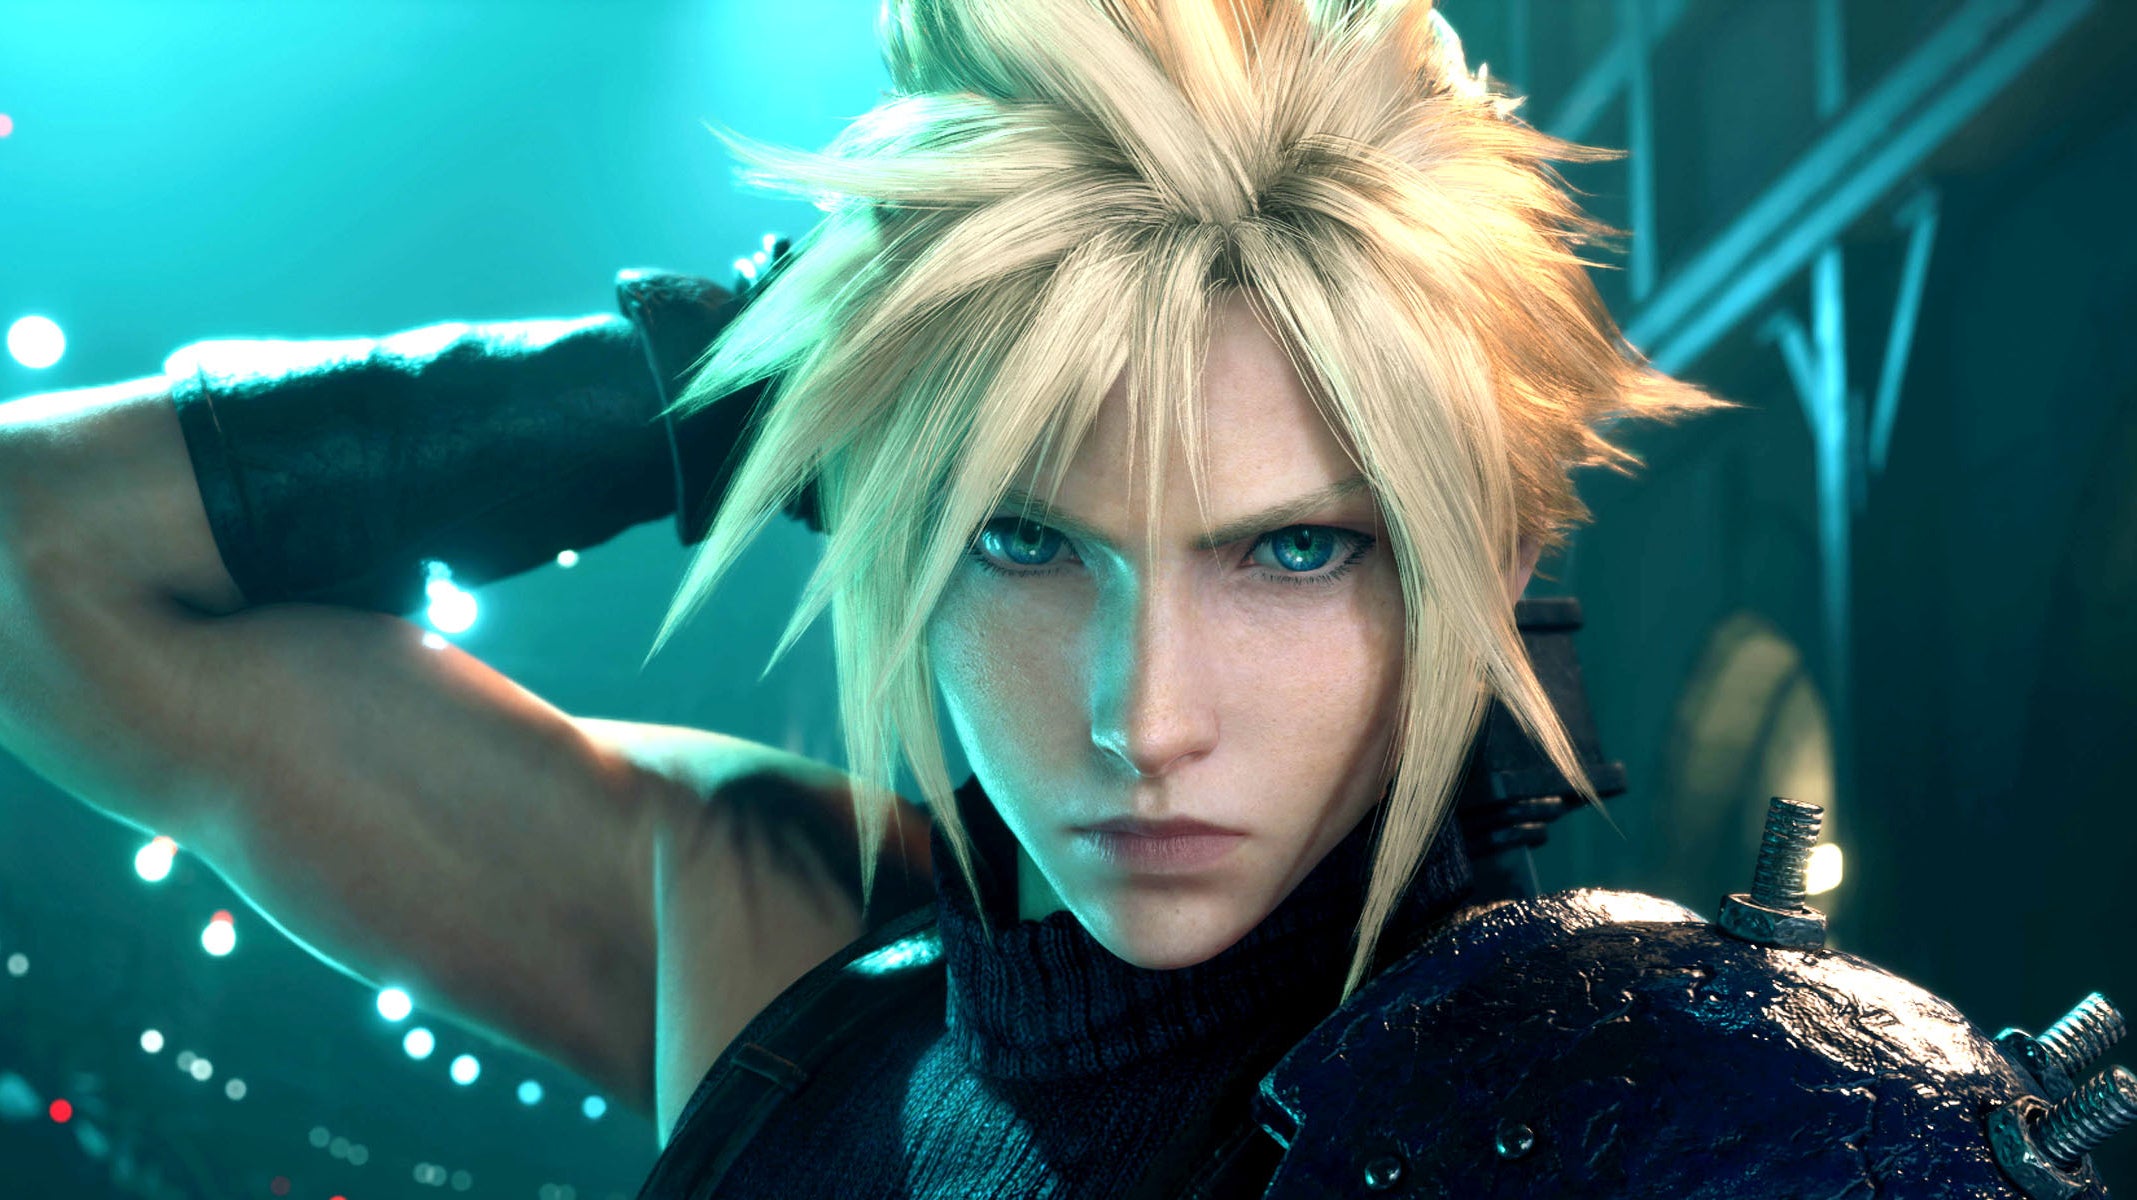 Image for Final Fantasy 7 Remake on PC is a disappointing, barebones port